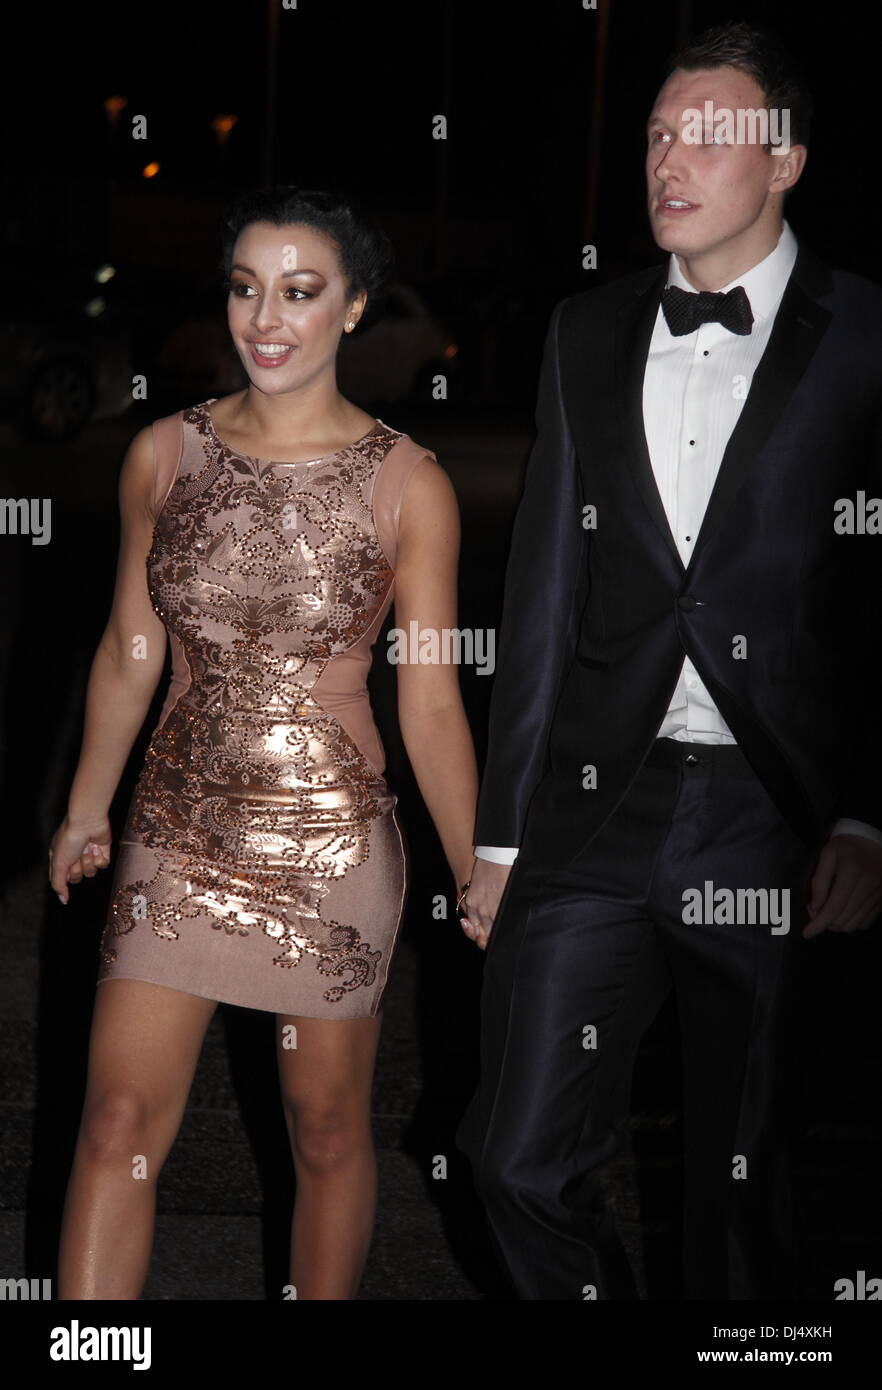 Old Trafford, Manchester, UK.  21 Nov 2013.  Phil Jones and Kaya Hall - Arrivals at the United for UNICEF Gala Dinner attended by the full Manchester United first-team and celebrities.  The dinner celebrated 14 years of the partnership between Manchester United and UNICEF, the worldÕs leading childrenÕs organisation, and raised over £200,000 for its work for vulnerable children around the world. Credit:  Deborah Vernon/Alamy Live News Stock Photo